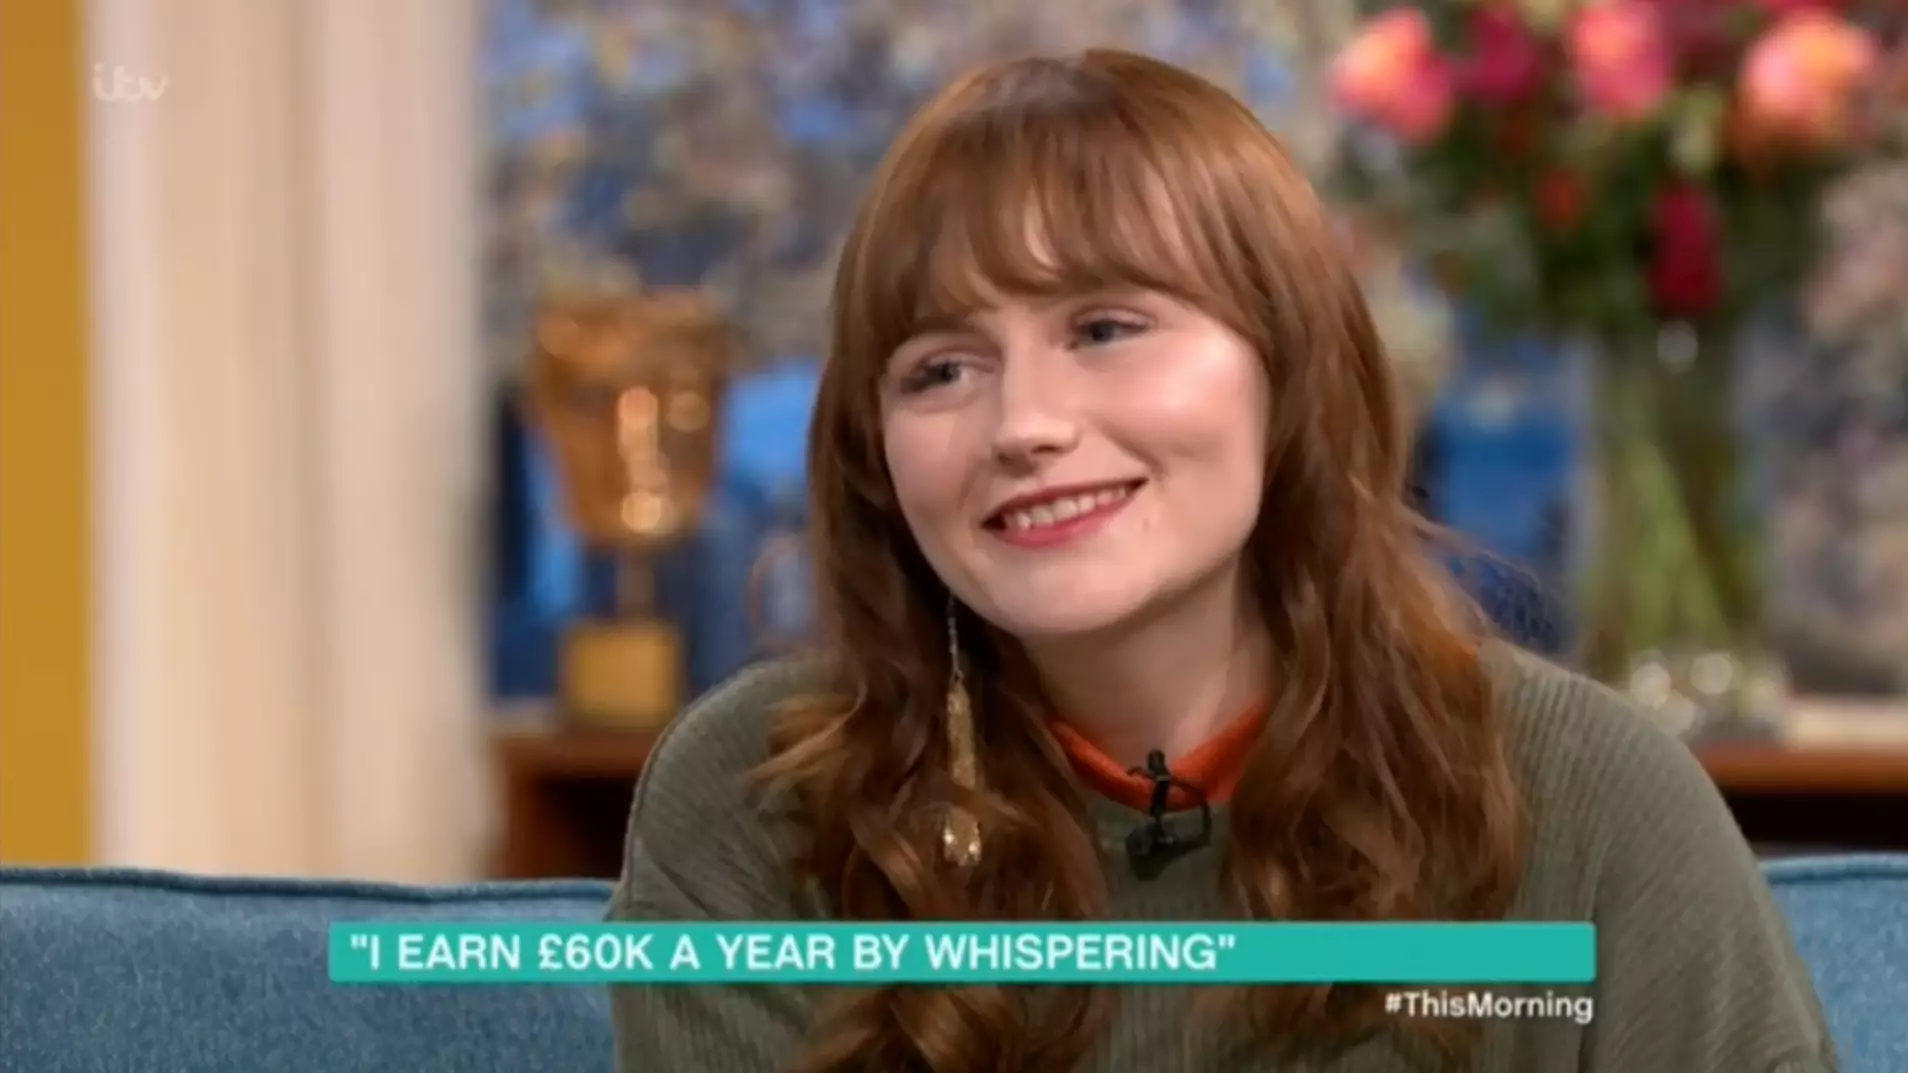 YouTube 'Whispering Girl' Tells 'This Morning' Viewers How She Earns £60k A Year Online